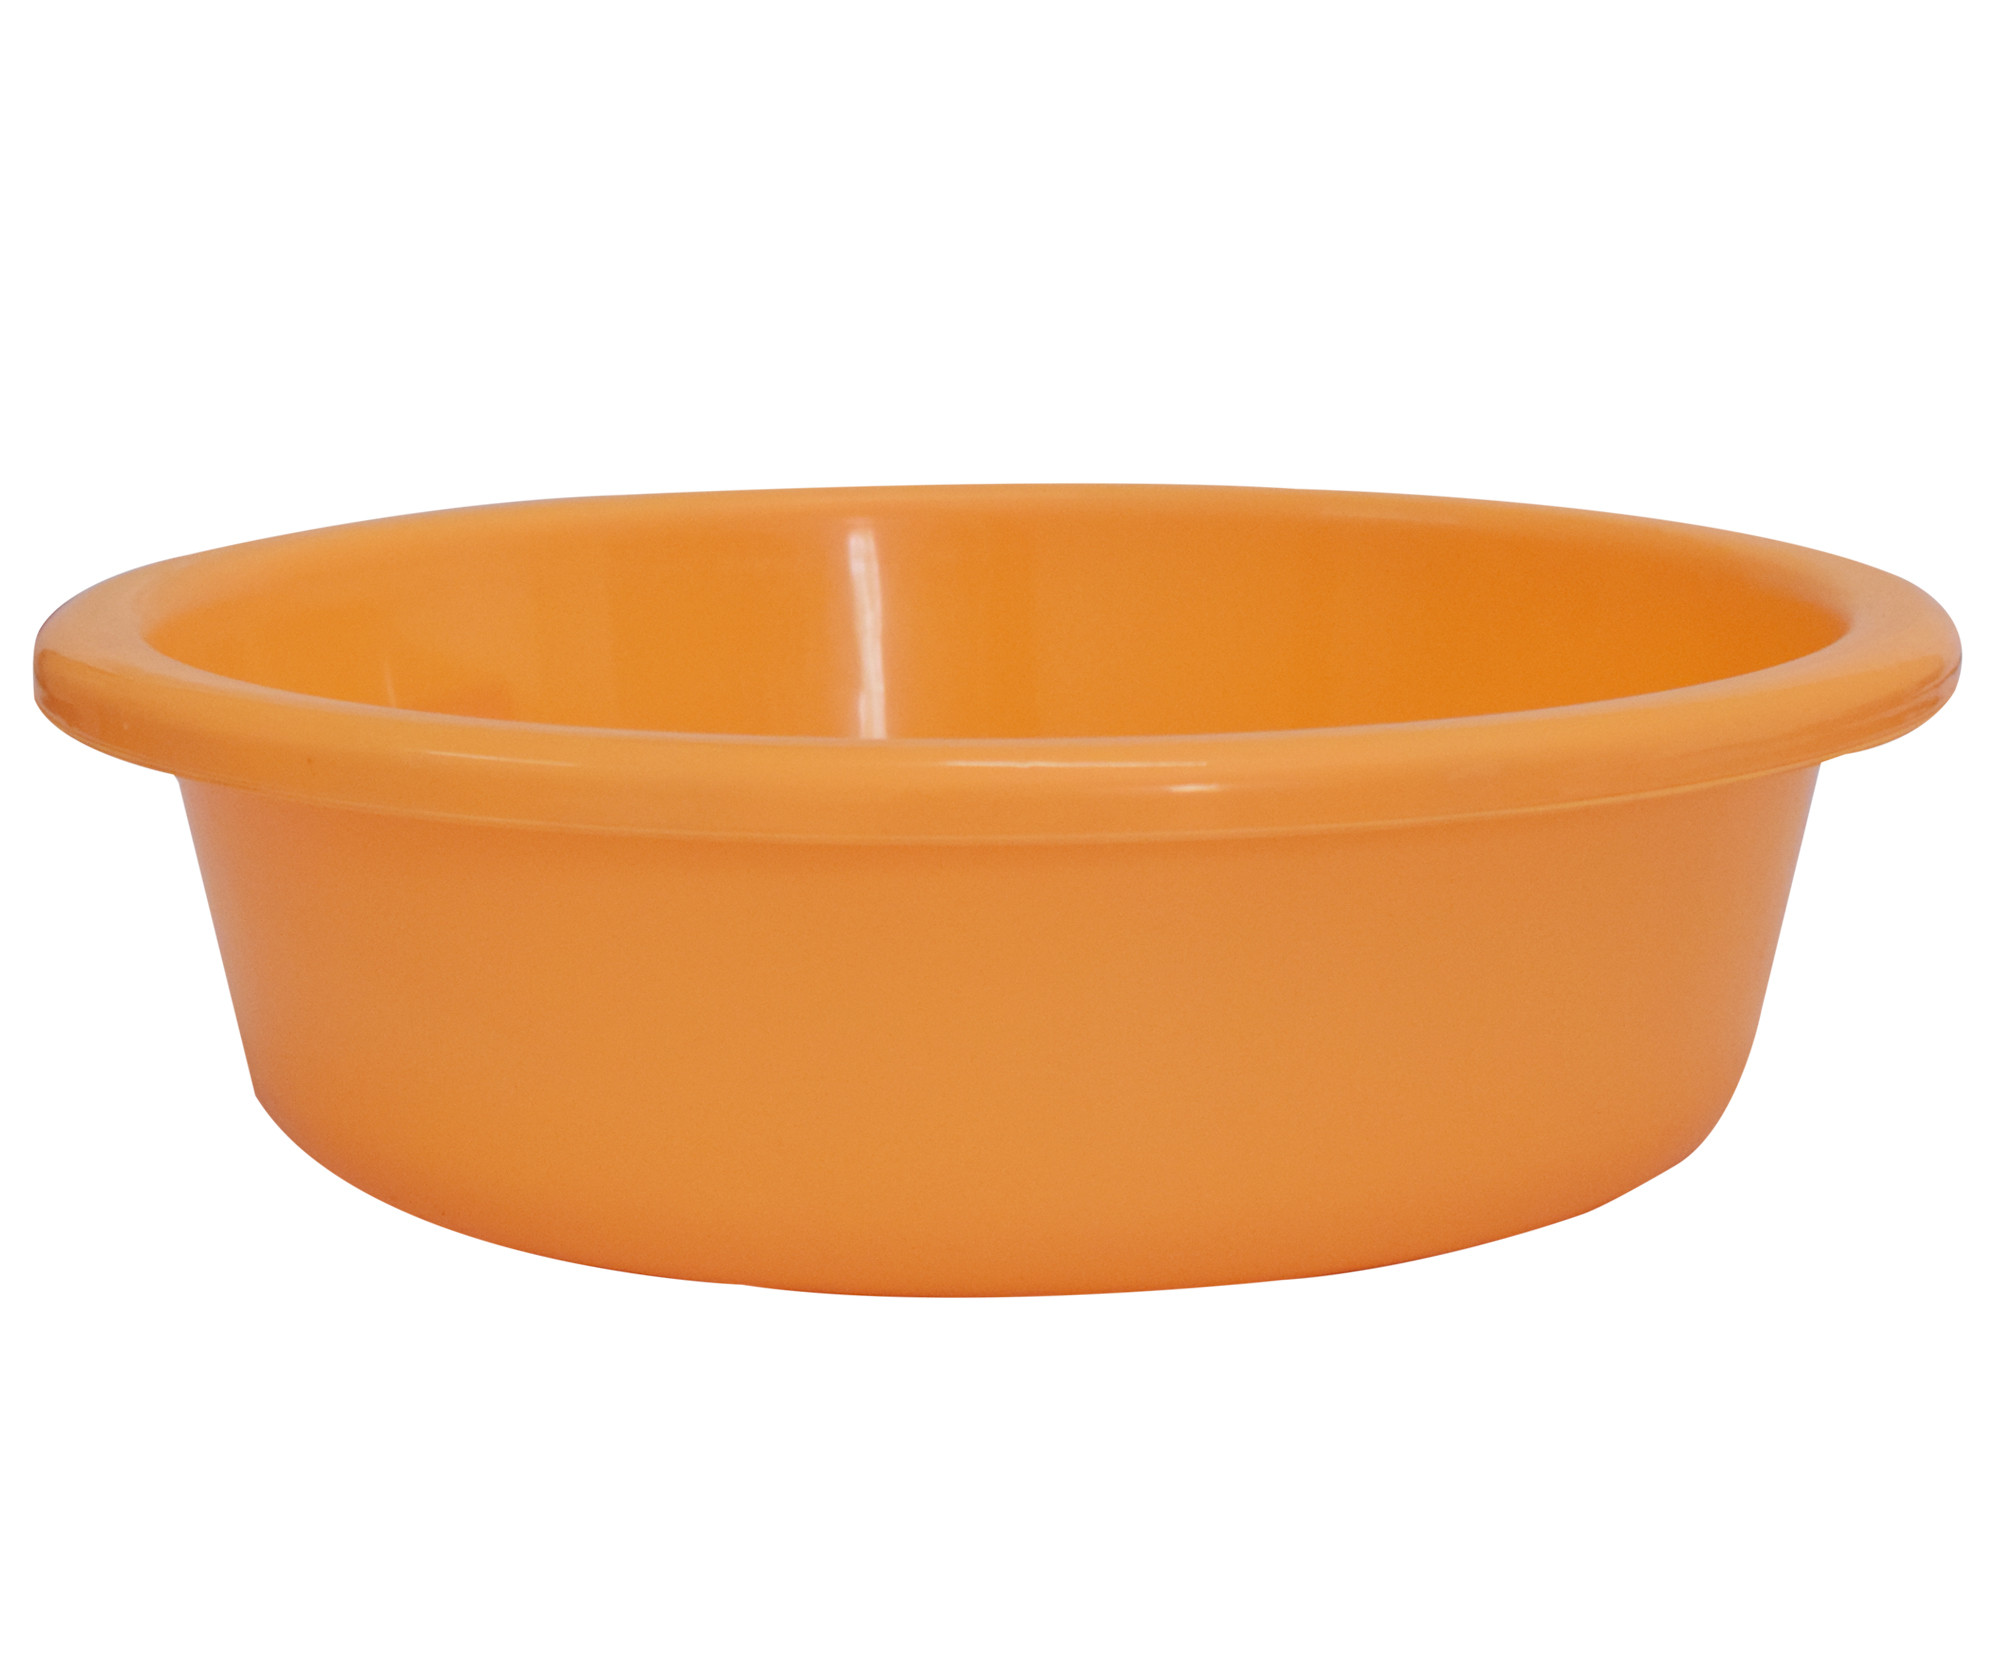 Kuber Industries Multiuses Unbreakable Plastic Knead Dough Basket/Basin Bowl For Home & Kitchen 6 Ltr- Pack of 2 (Yellow & Green)